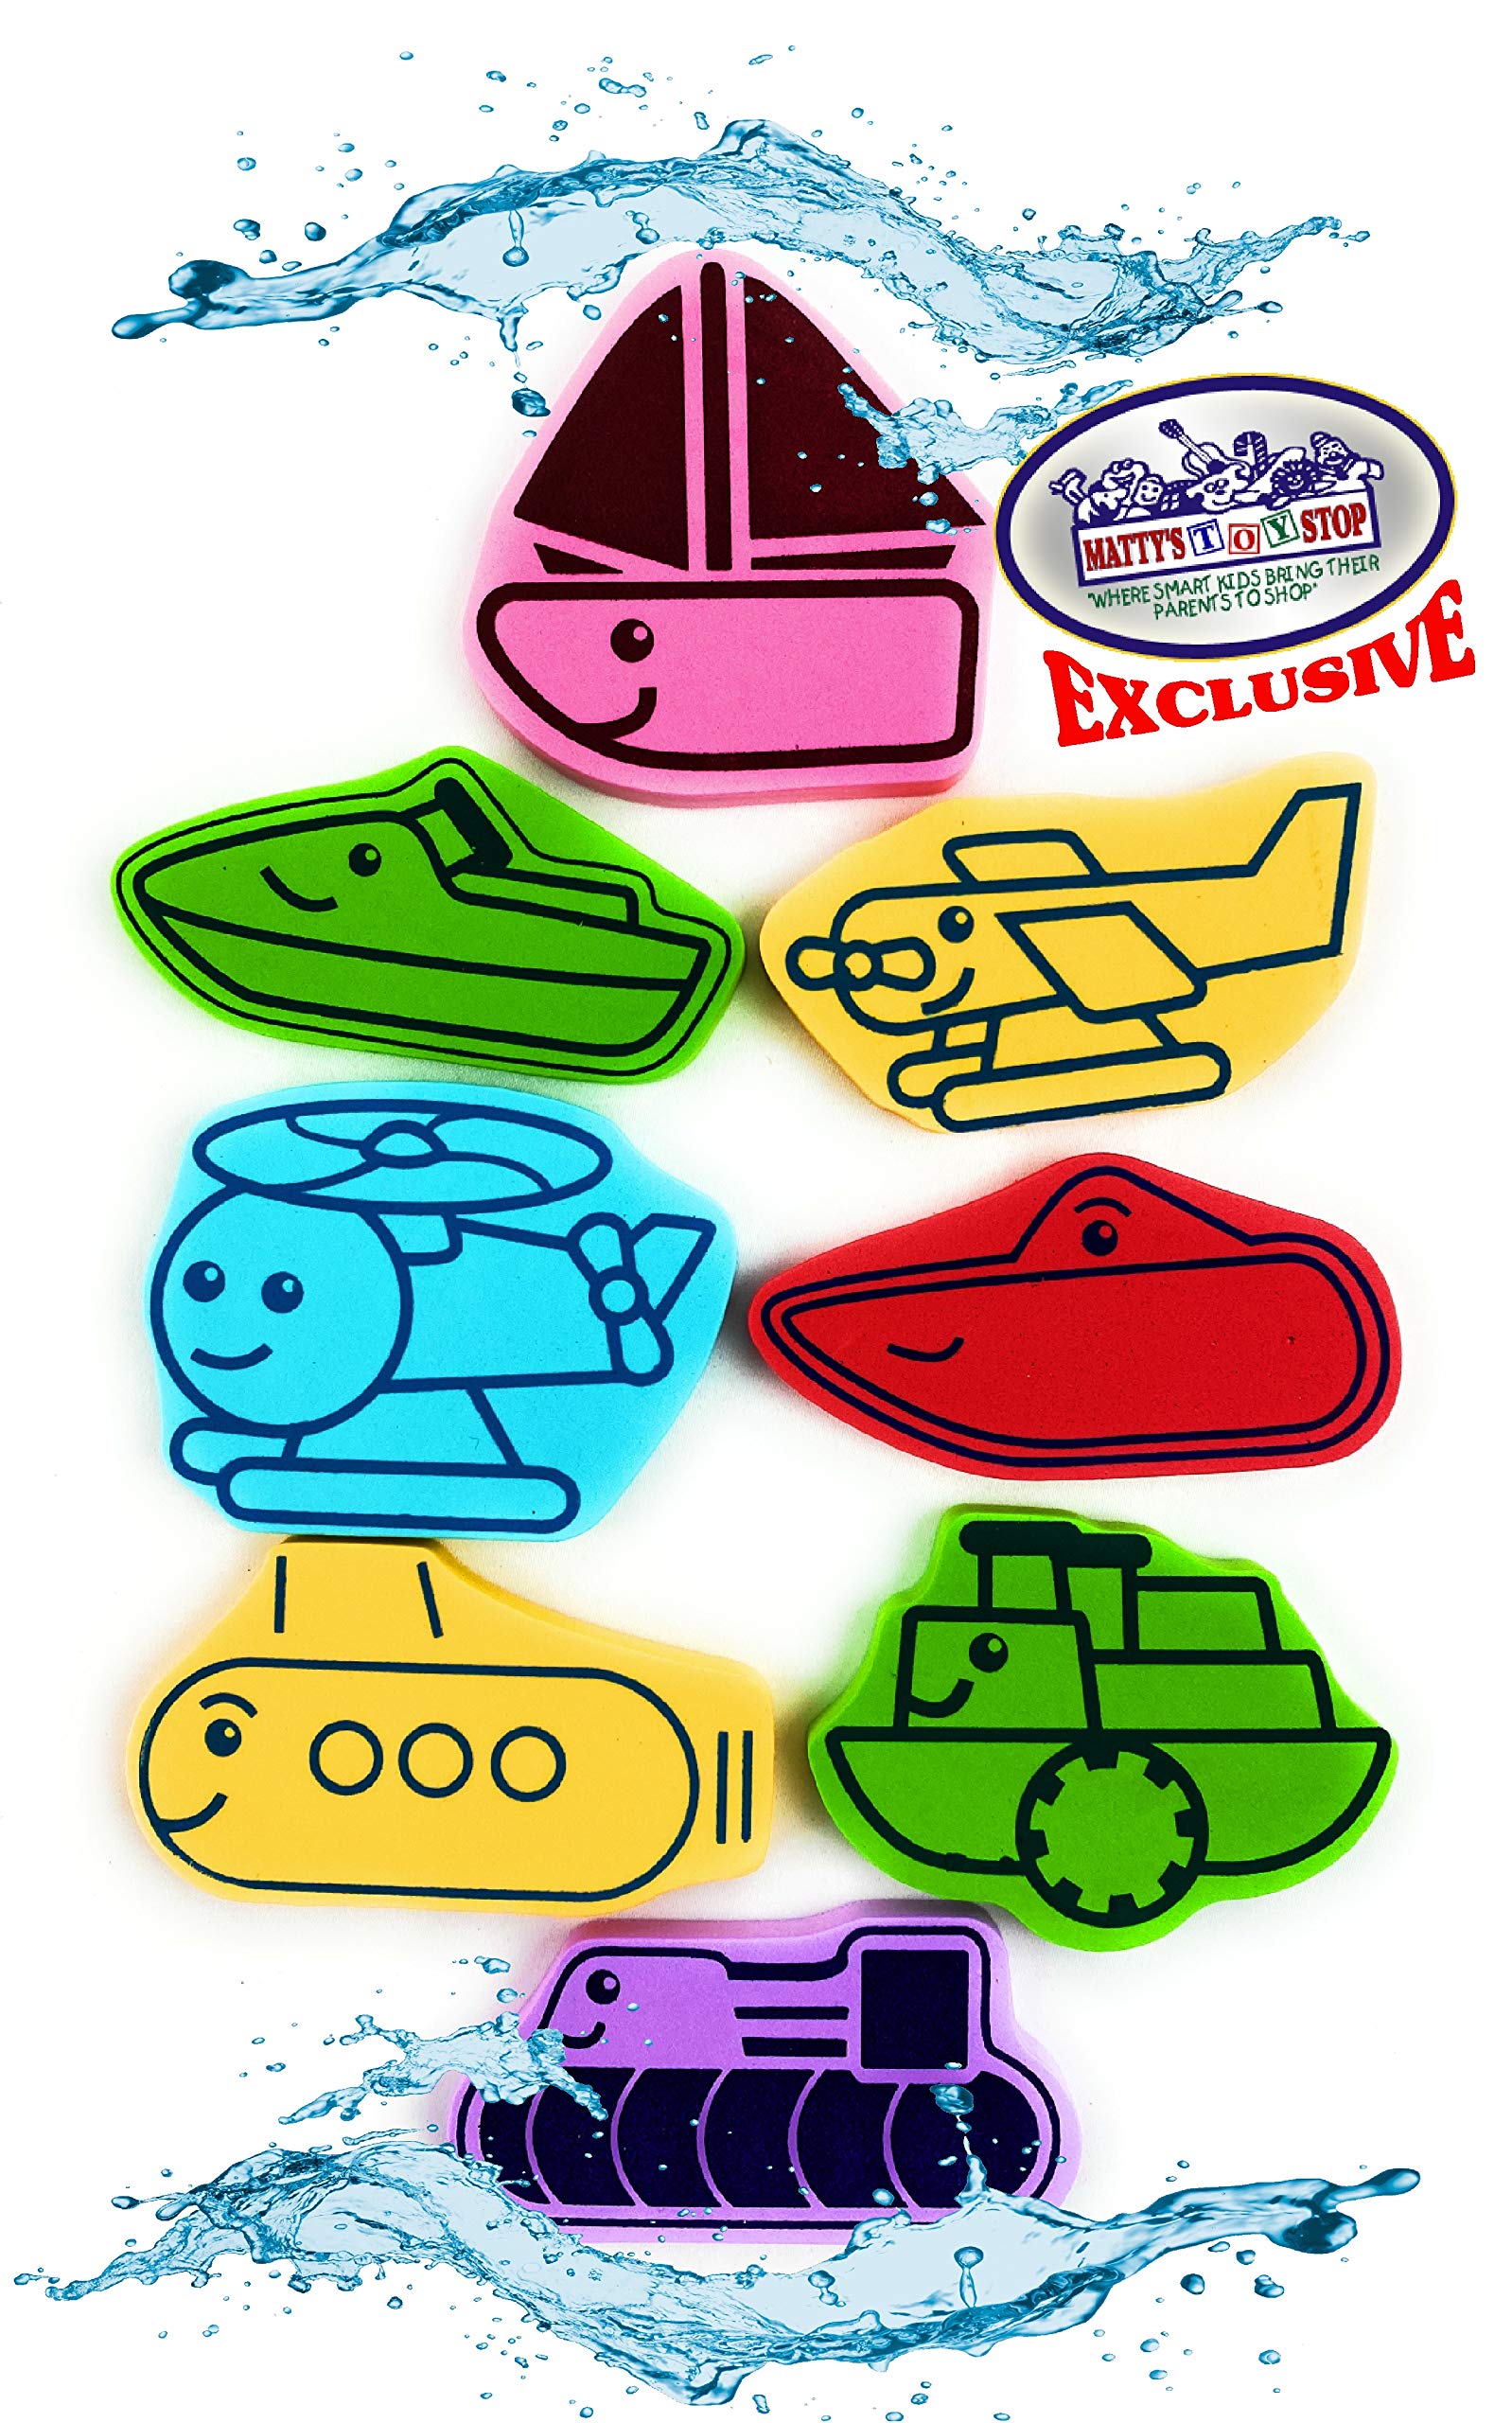 Mɑtty's Toy Stop 119pcs Ultimate Bath Toys Set Featuring Giant Rubber Duck, Bath Stickers, Mirrors, Crayons, Sponge, Mini Animals, Medium Animals, Stacking Boats, Foam Letters, Numbers & Storage Bag